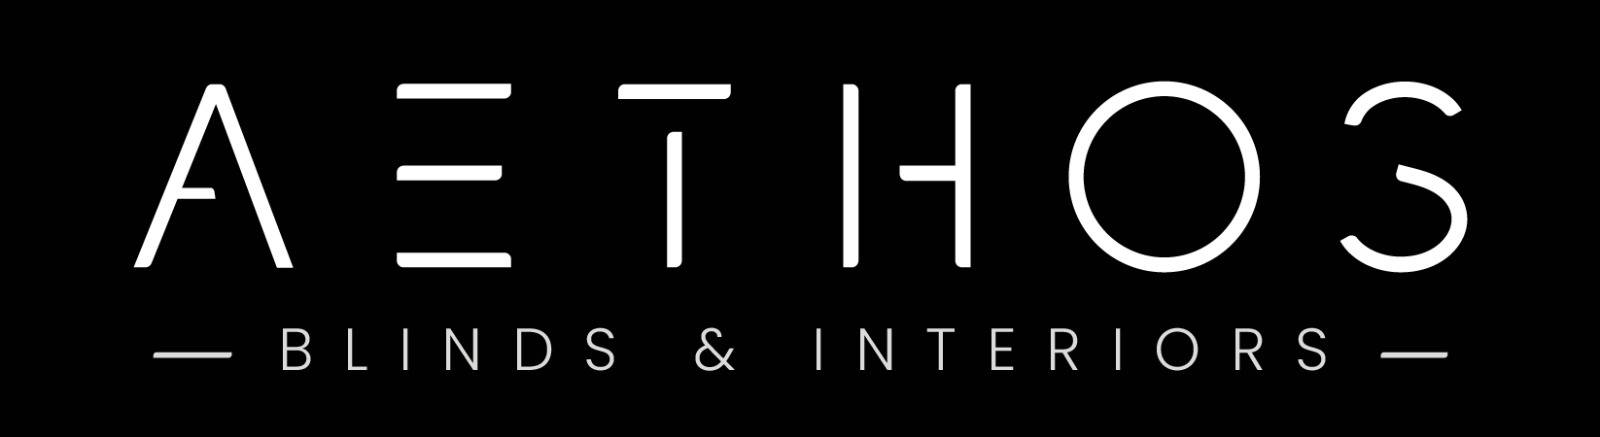 Aethos Blinds & Interiors